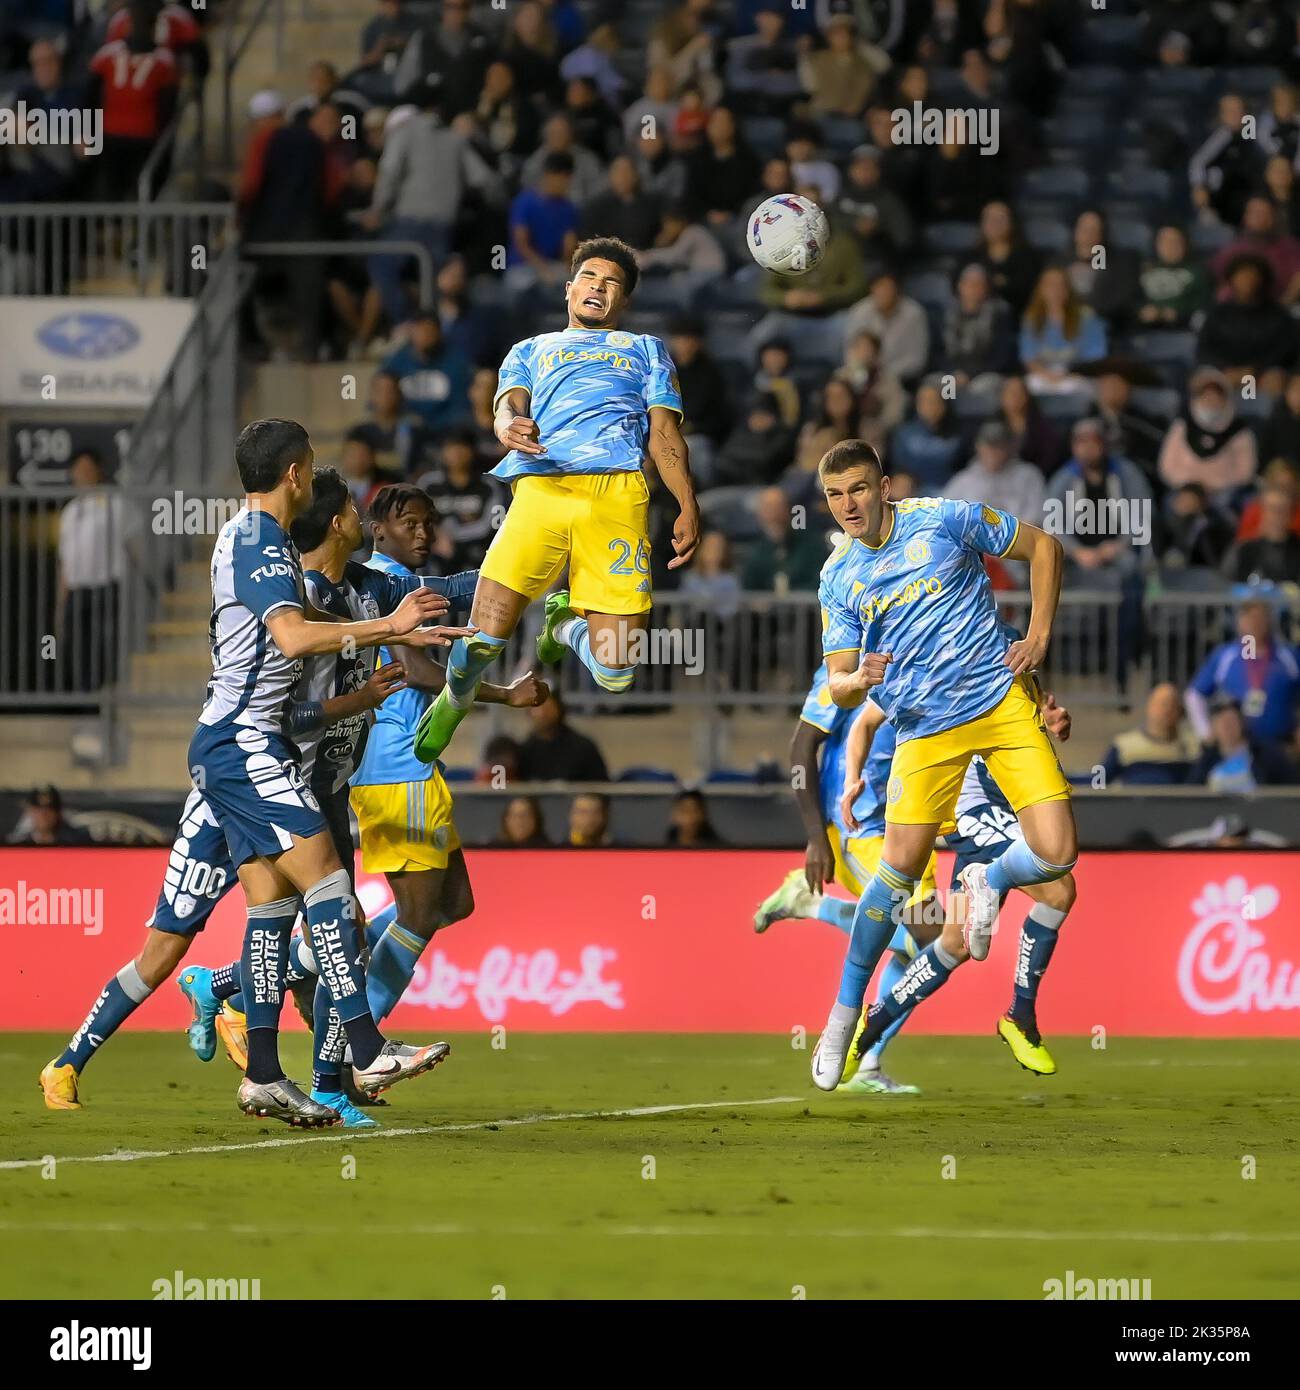 Chester, PA USA. 24th Sep - Philadelphia Union defender wins a header on a corner kick and scores the game winning goal. Photo by Don Mennig - Alamy Live News Stock Photo